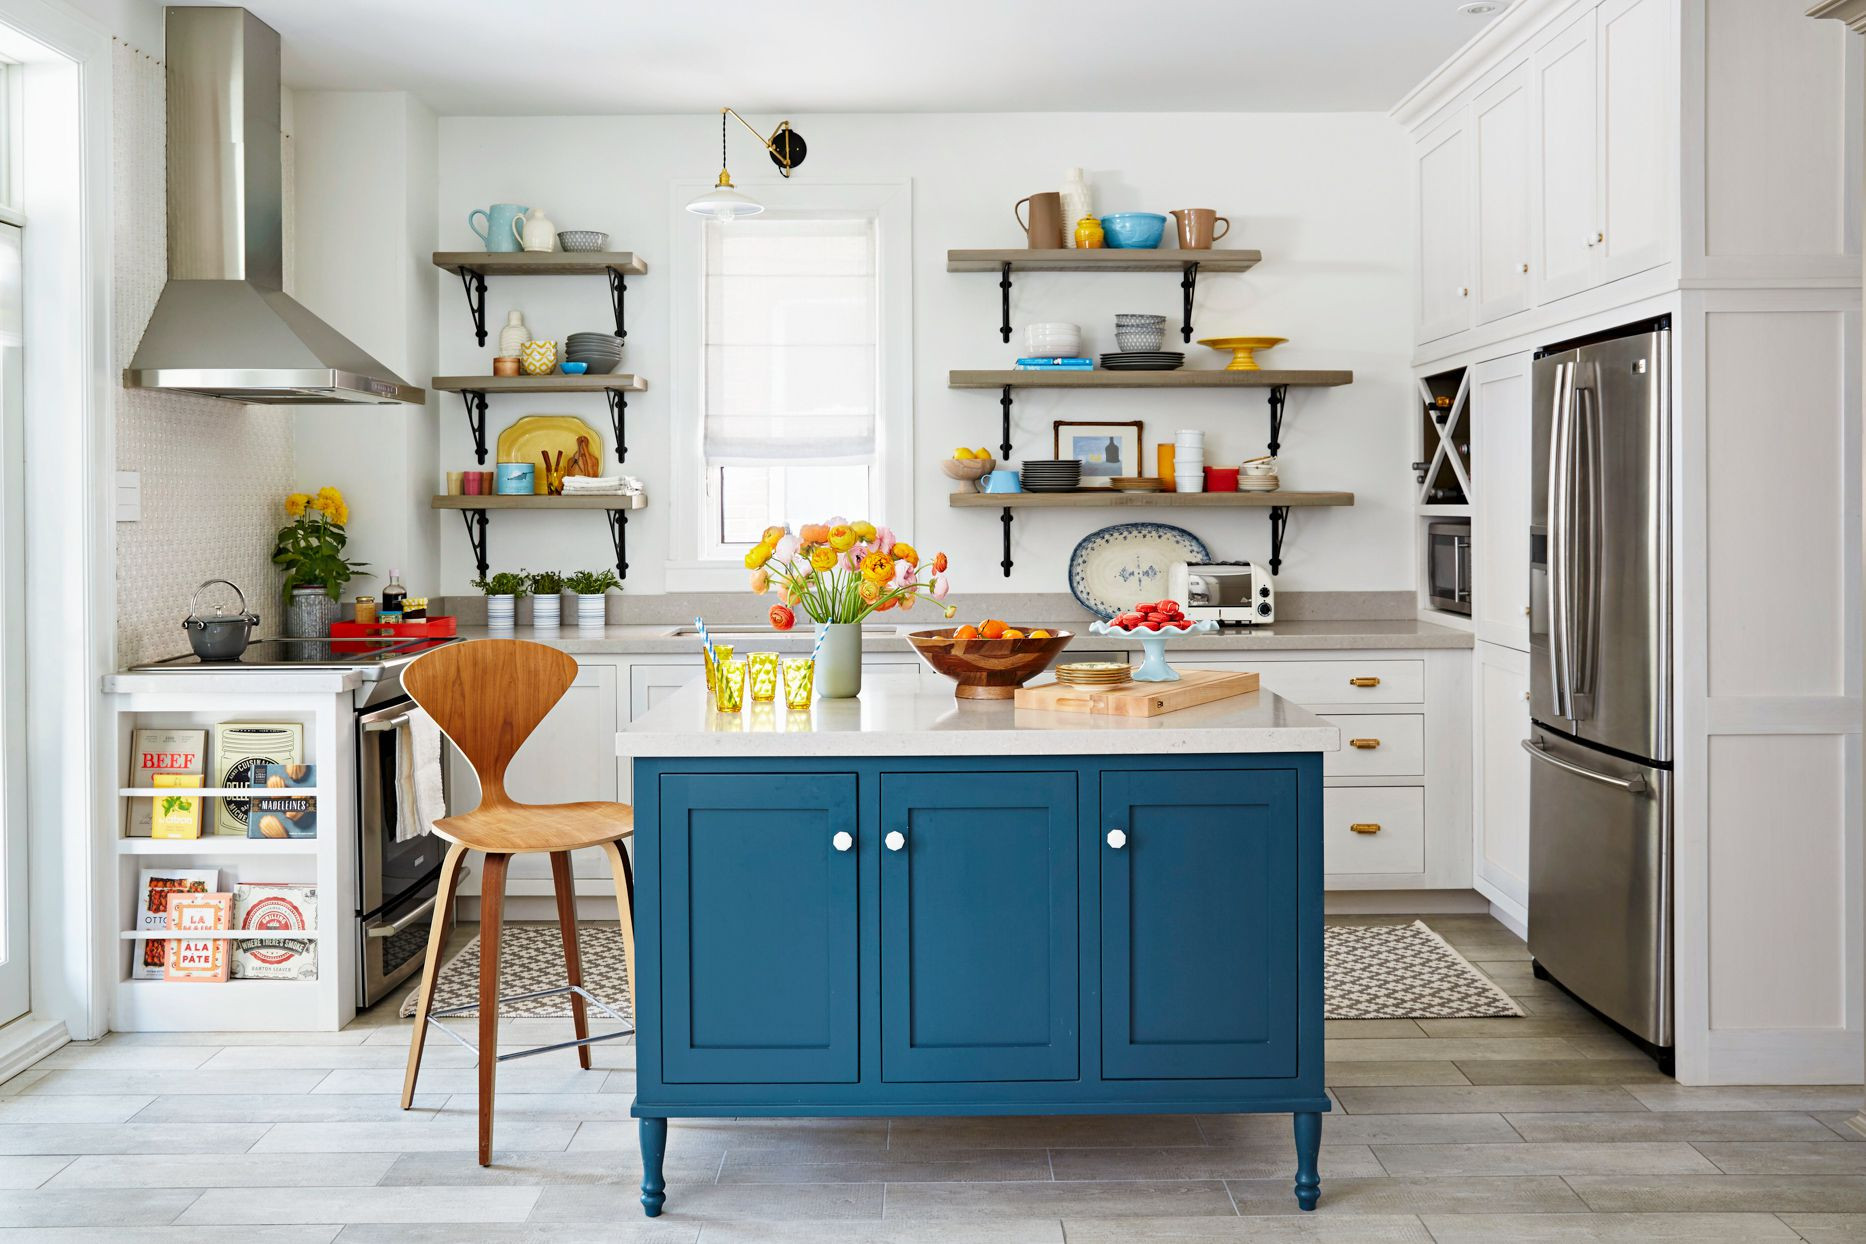 Small Kitchen Island Ideas that Maximize Storage and Prep Space